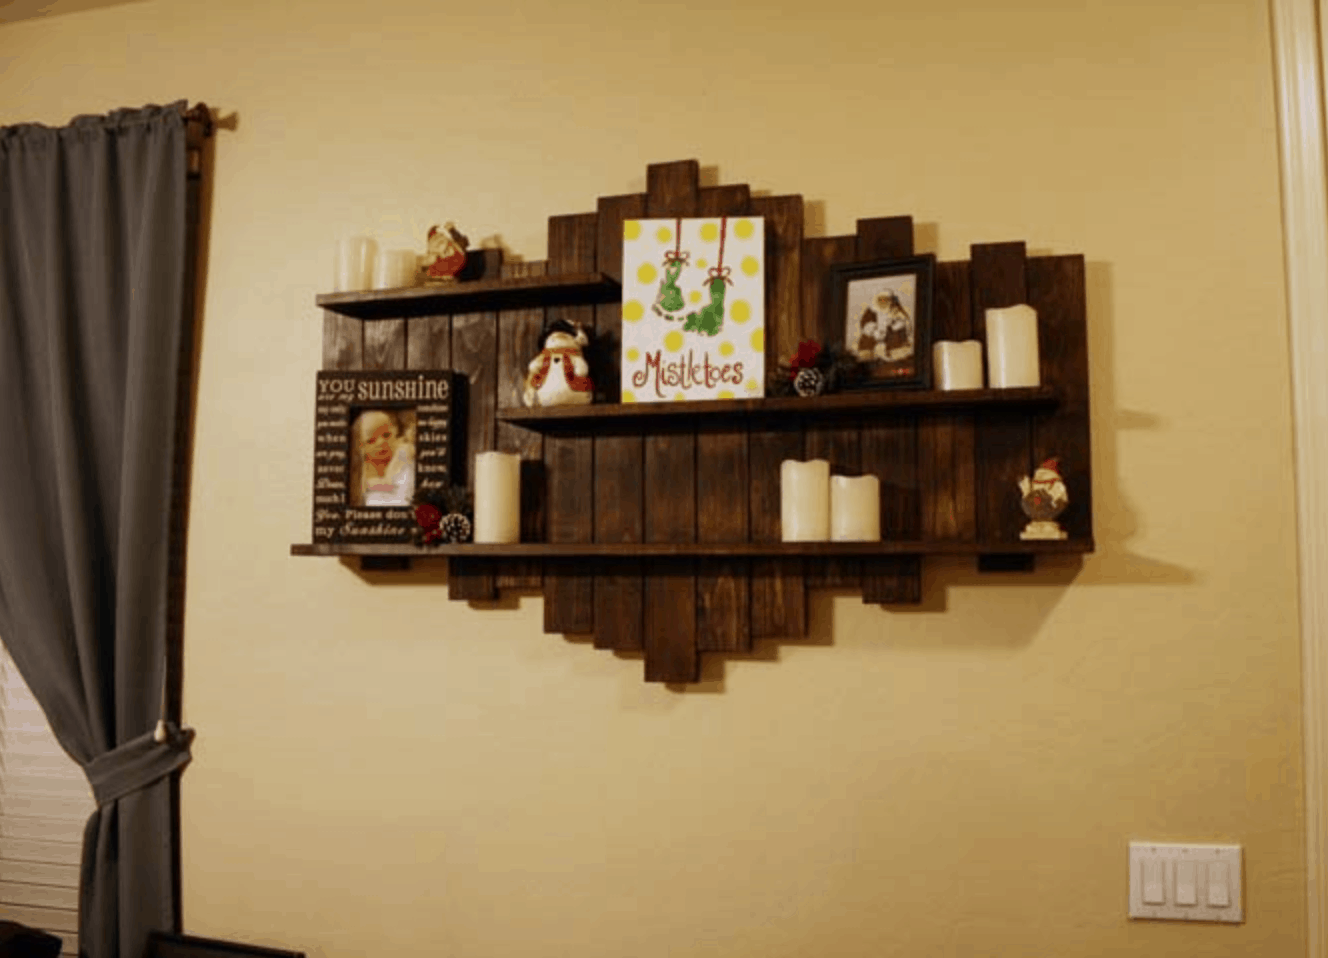 21 Brilliantly Clever Diy Pallet Shelves To Make For Any Room In